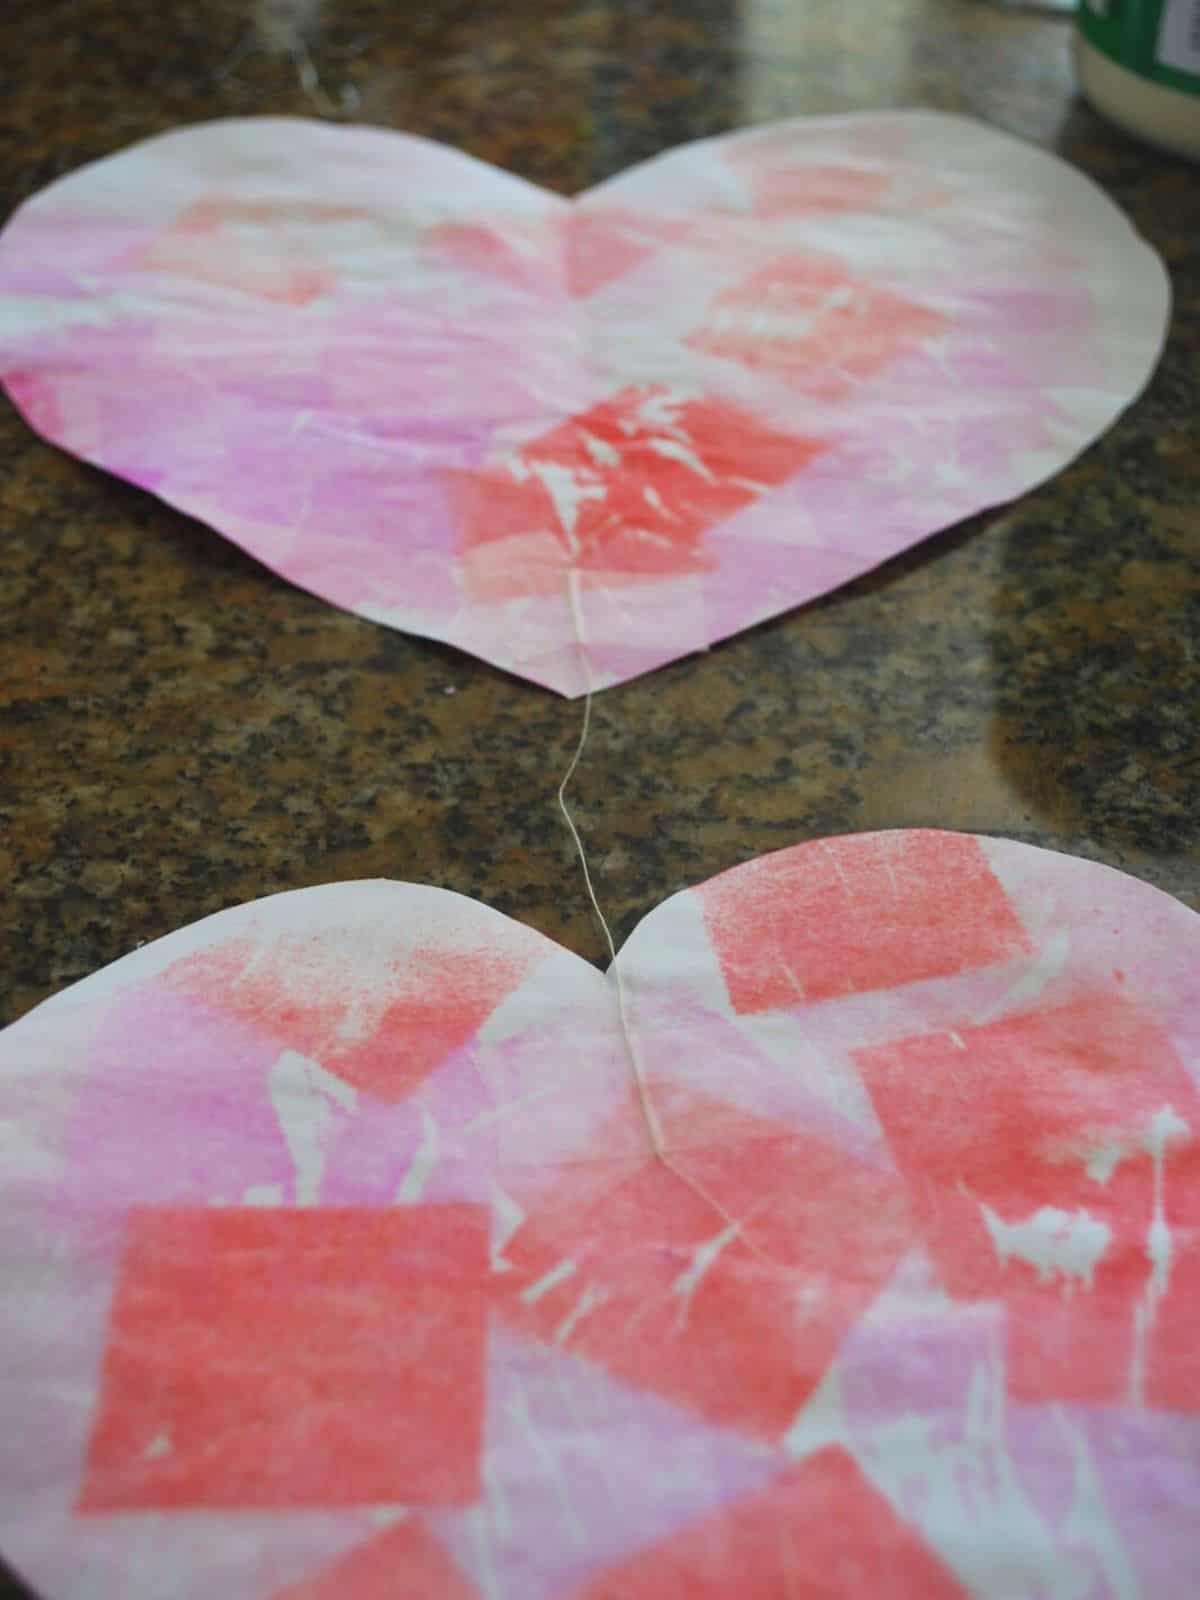 attaching thread to paper hearts